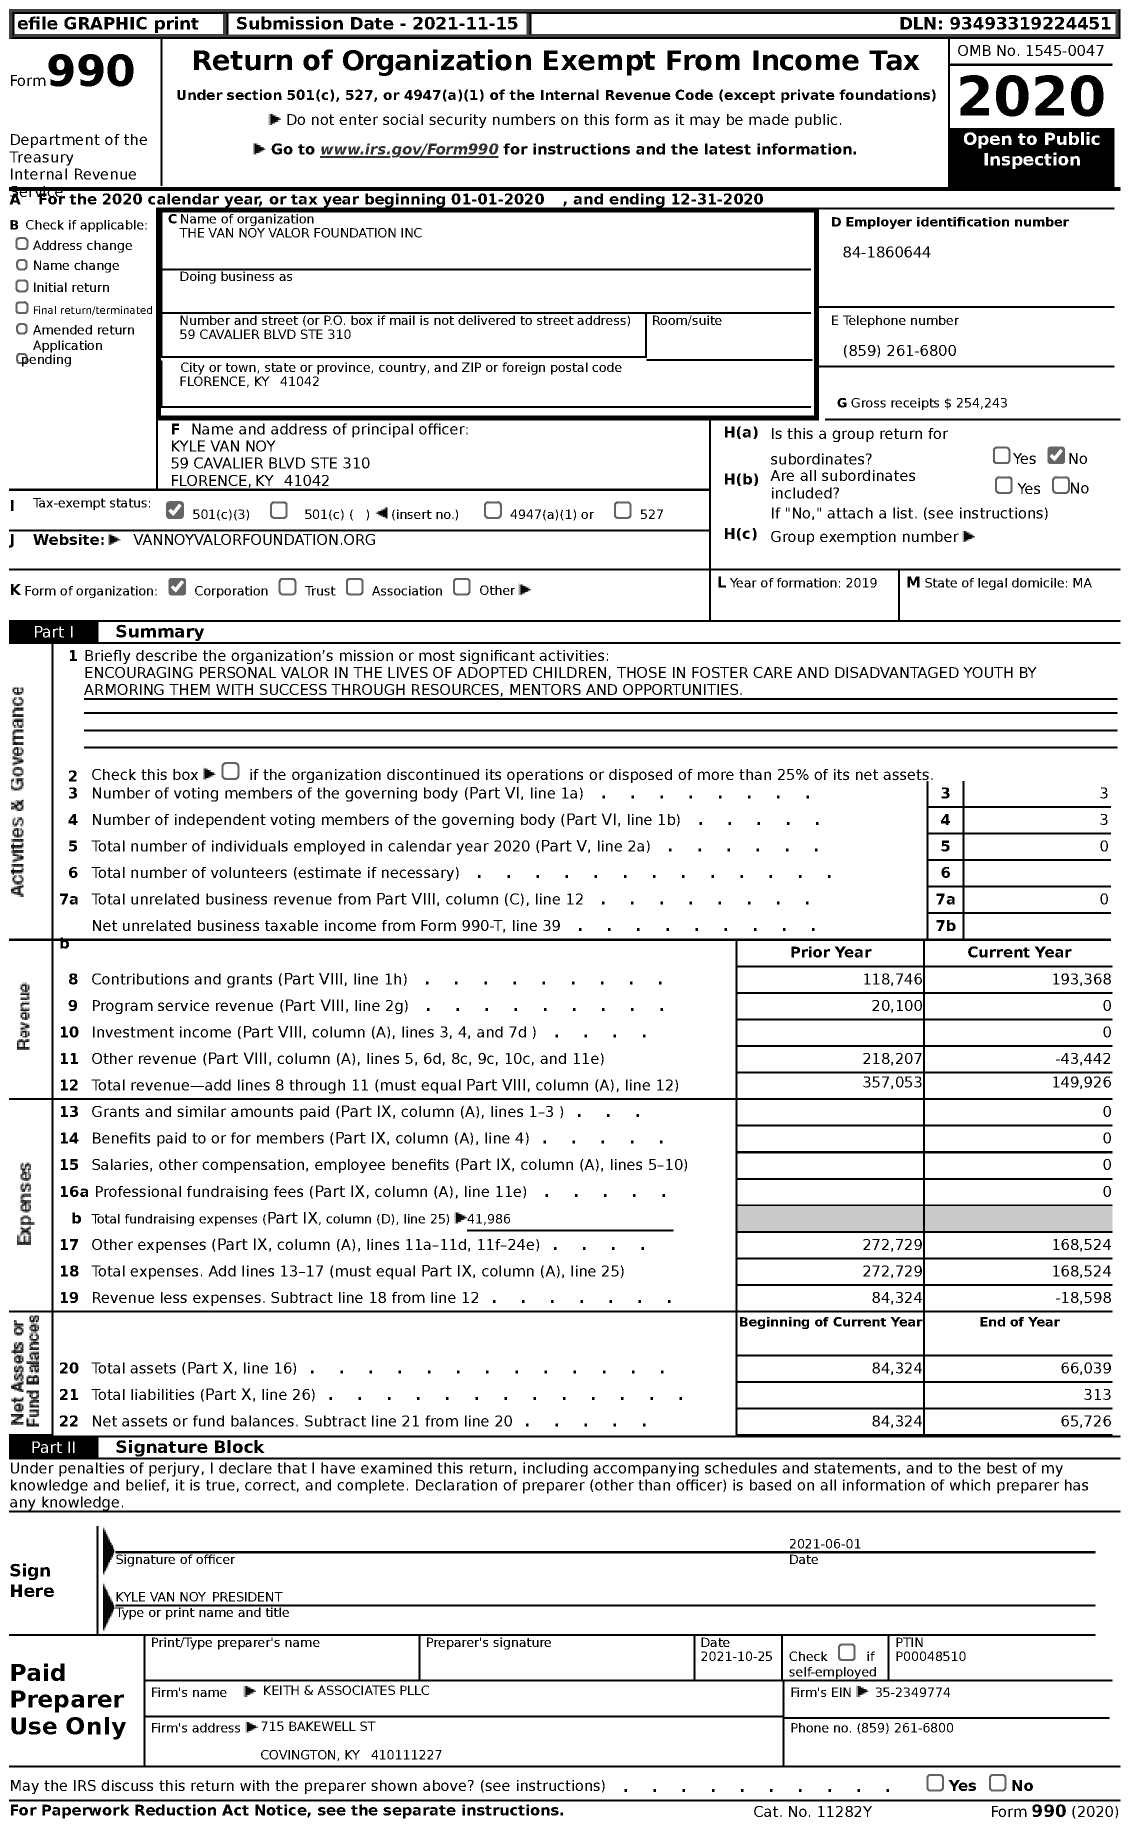 Image of first page of 2020 Form 990 for The Van Noy Valor Foundation